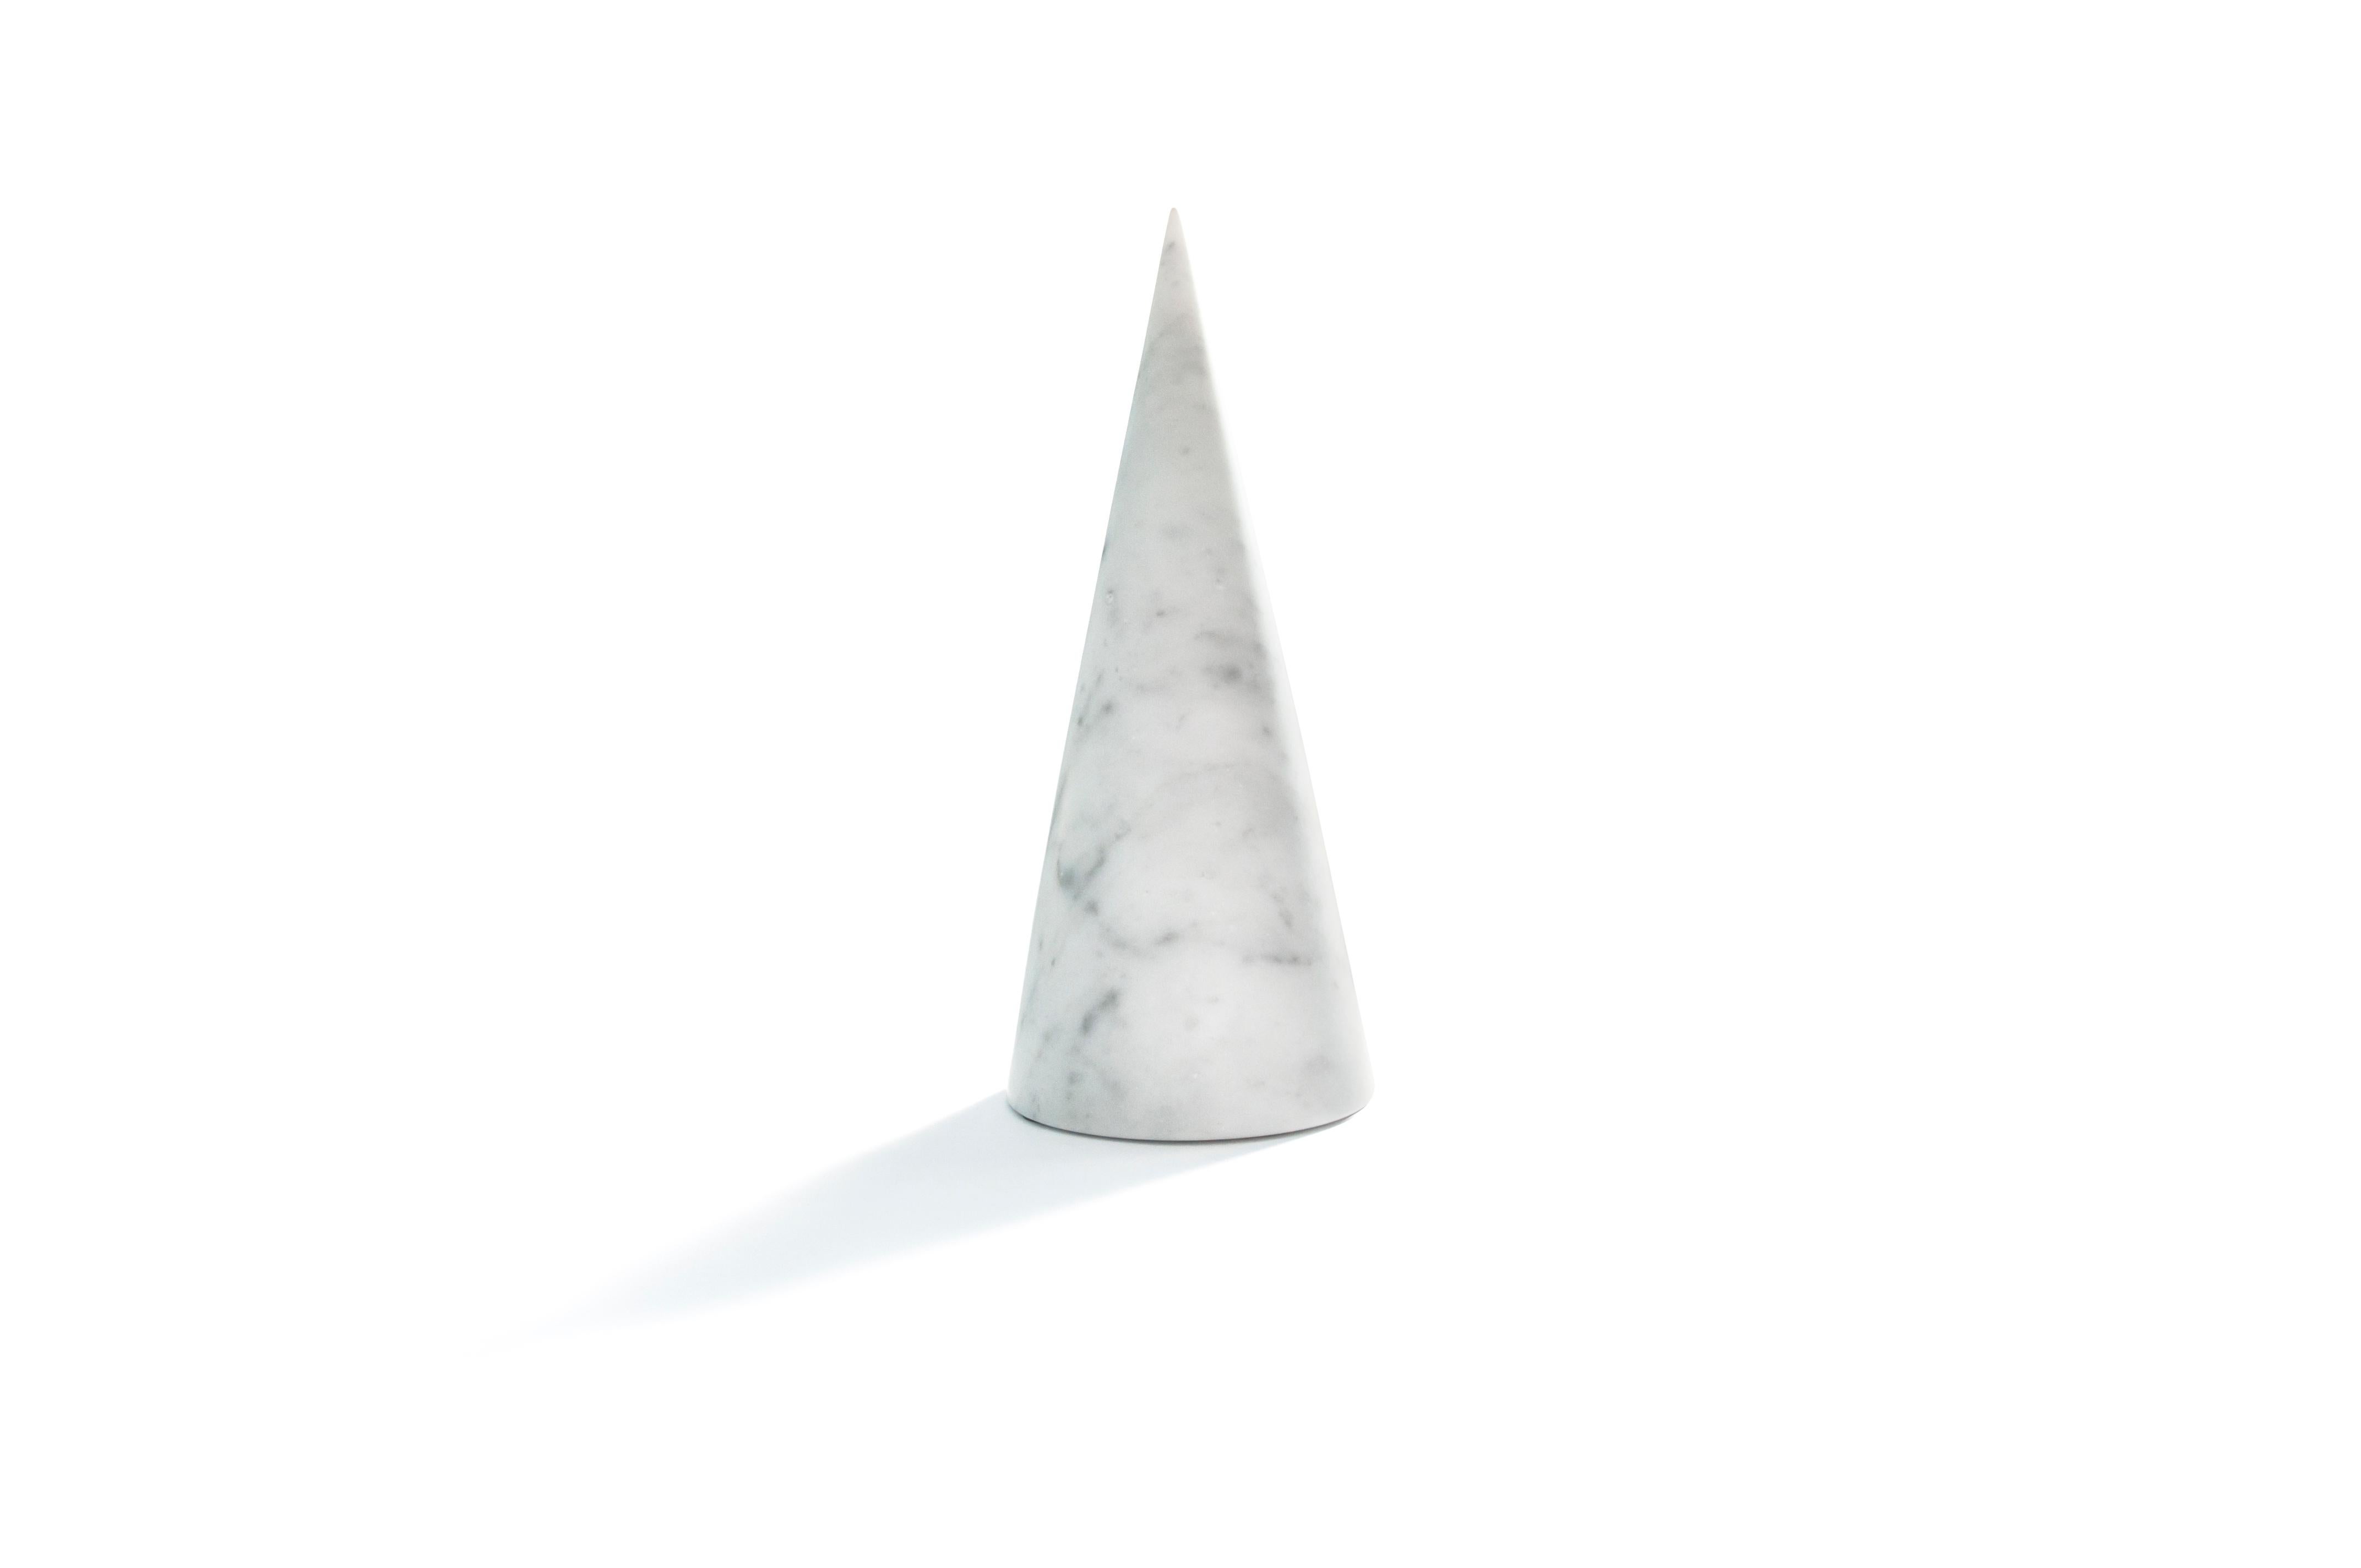 Handmade Big Bookend with Triangular Shape in Satin White Carrara Marble For Sale 2